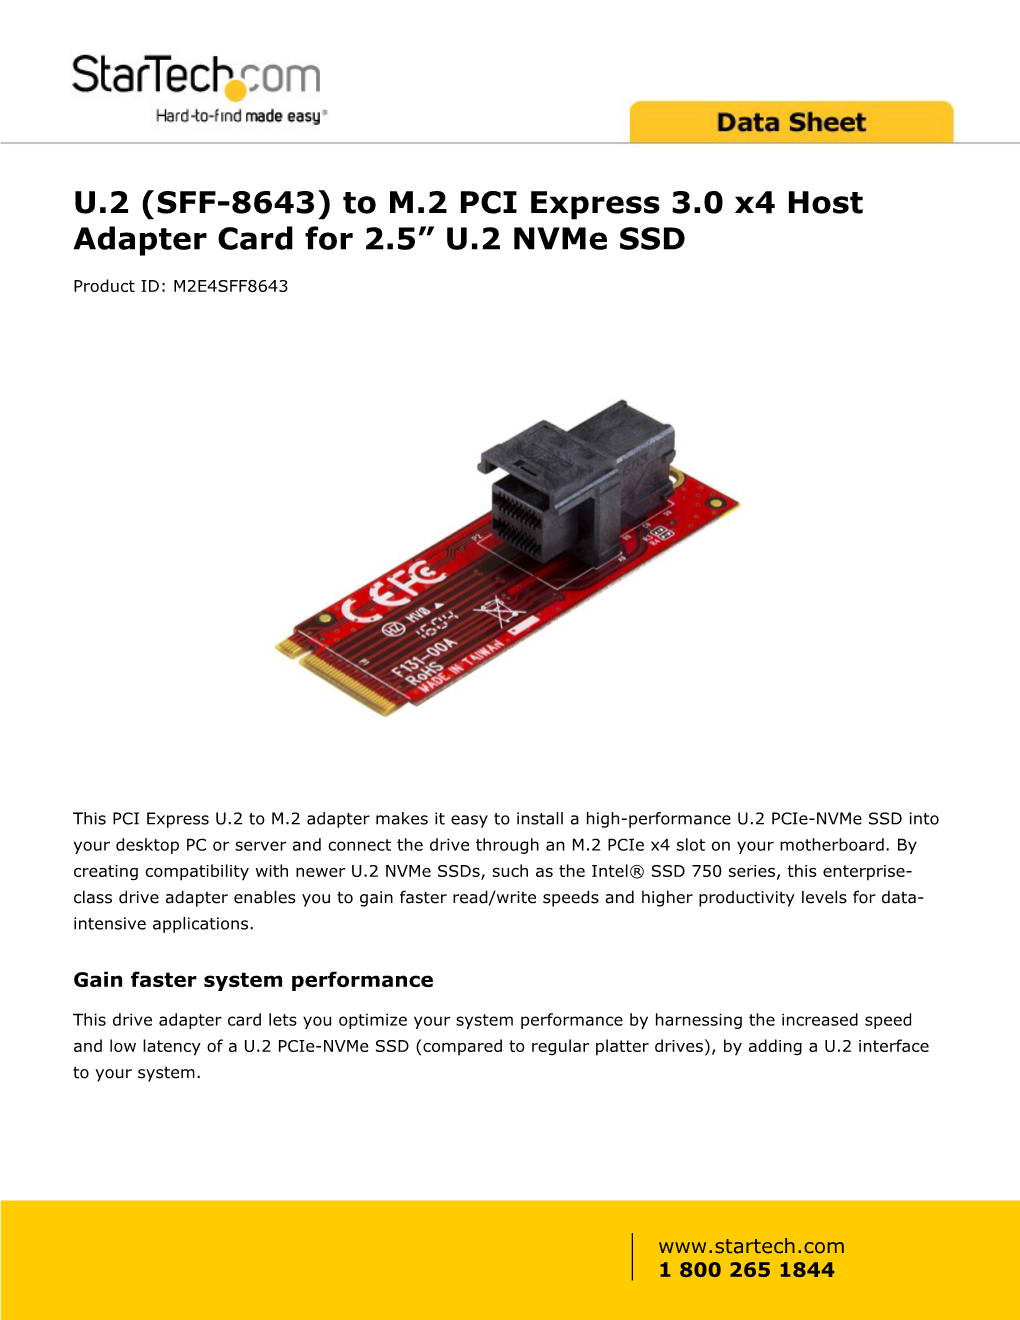 U.2 (SFF-8643) to M.2 PCI Express 3.0 X4 Host Adapter Card for 2.5” U.2 Nvme SSD